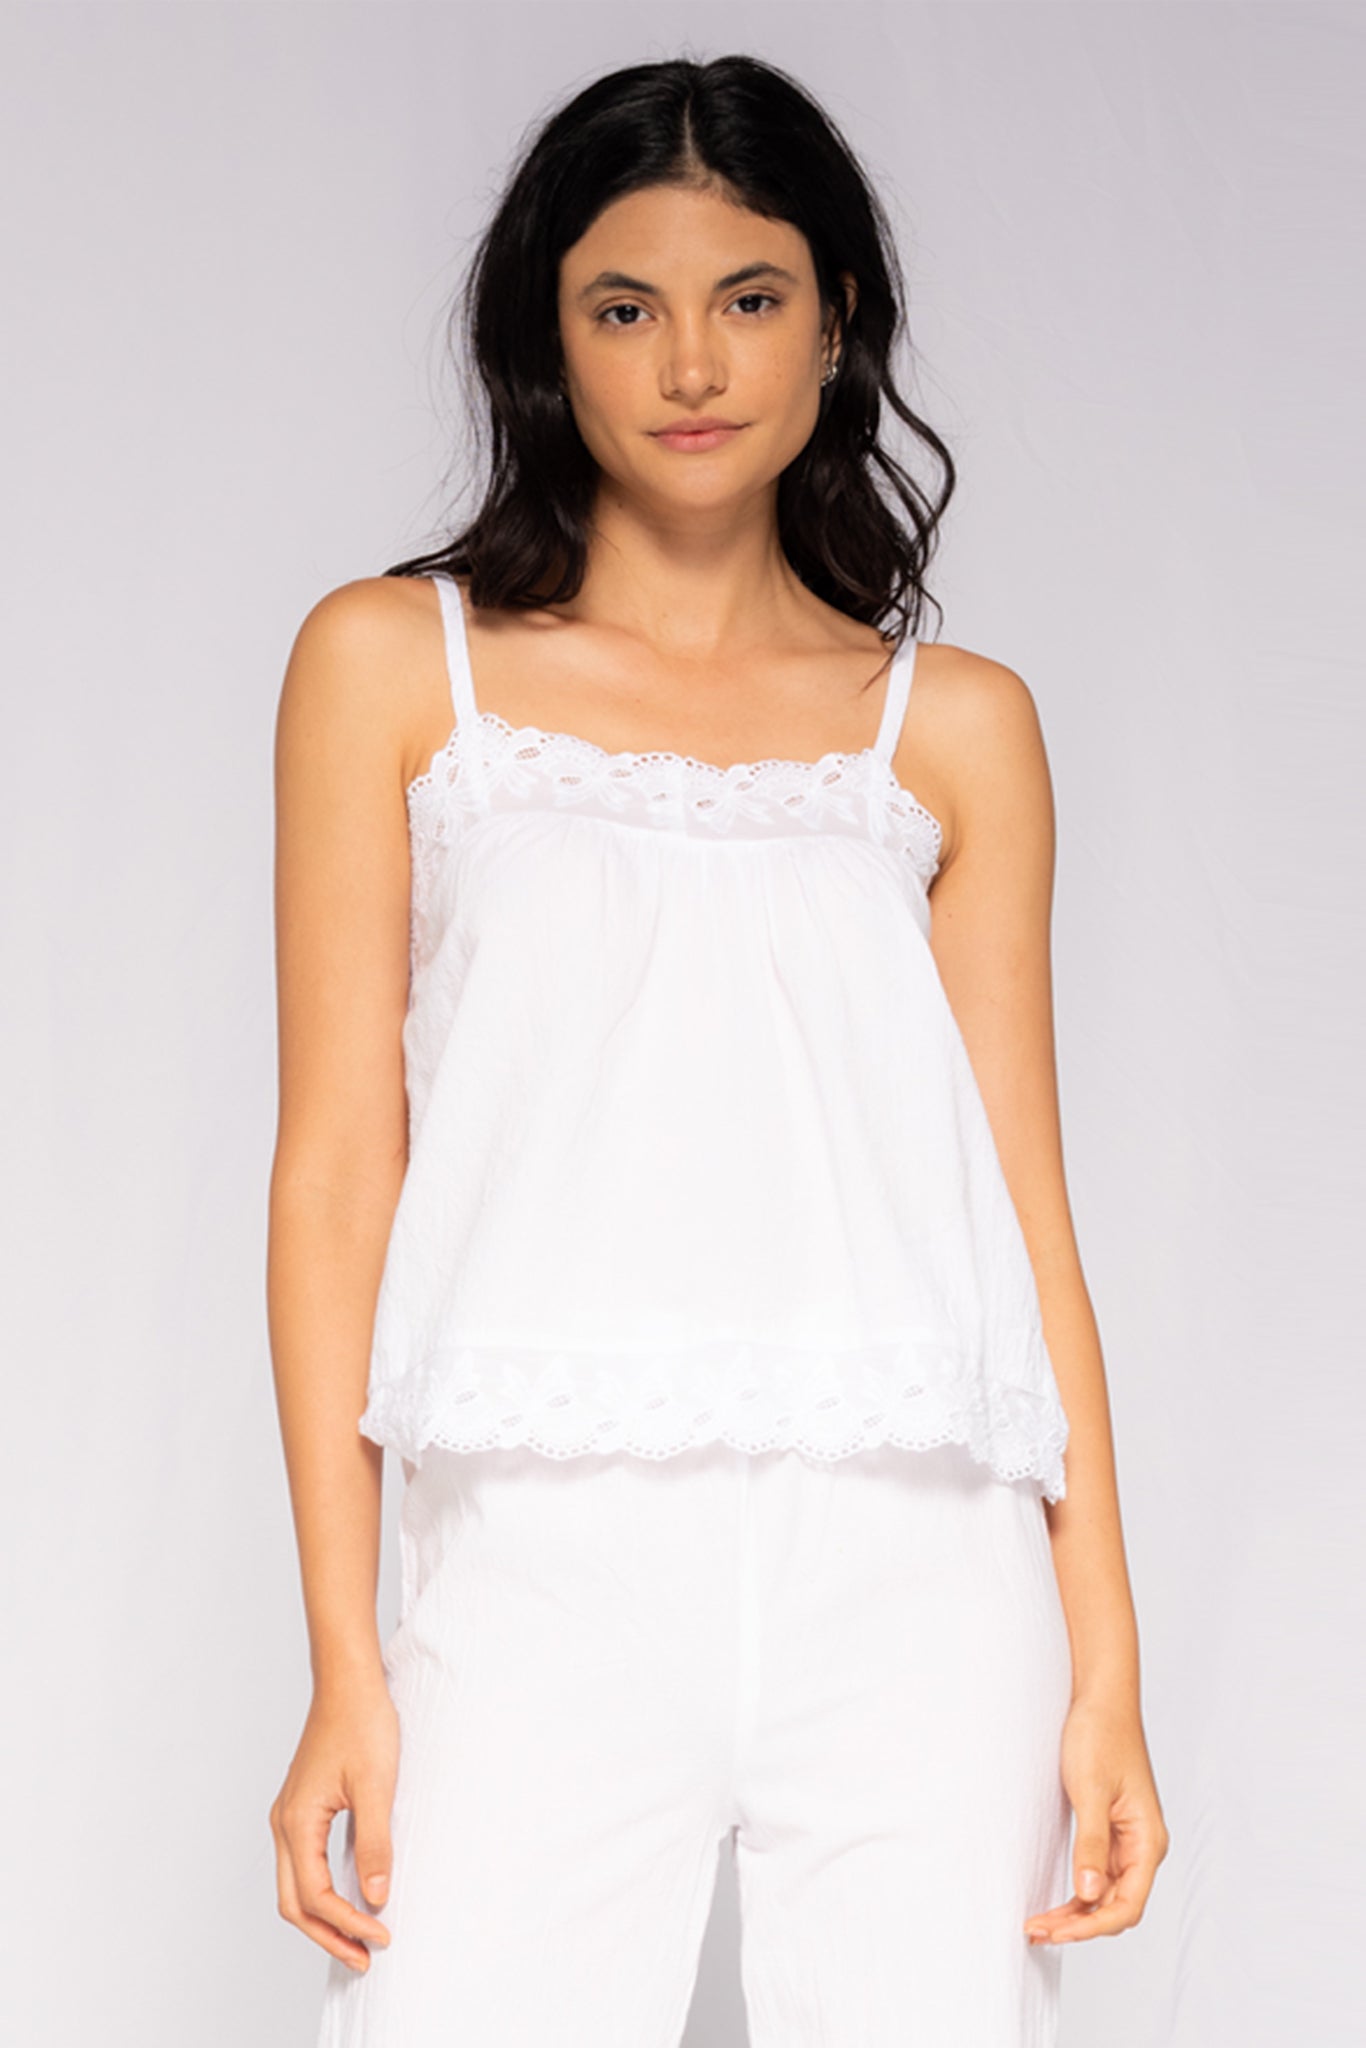 Cami top - Women's Cotton Embroidered Cami Top